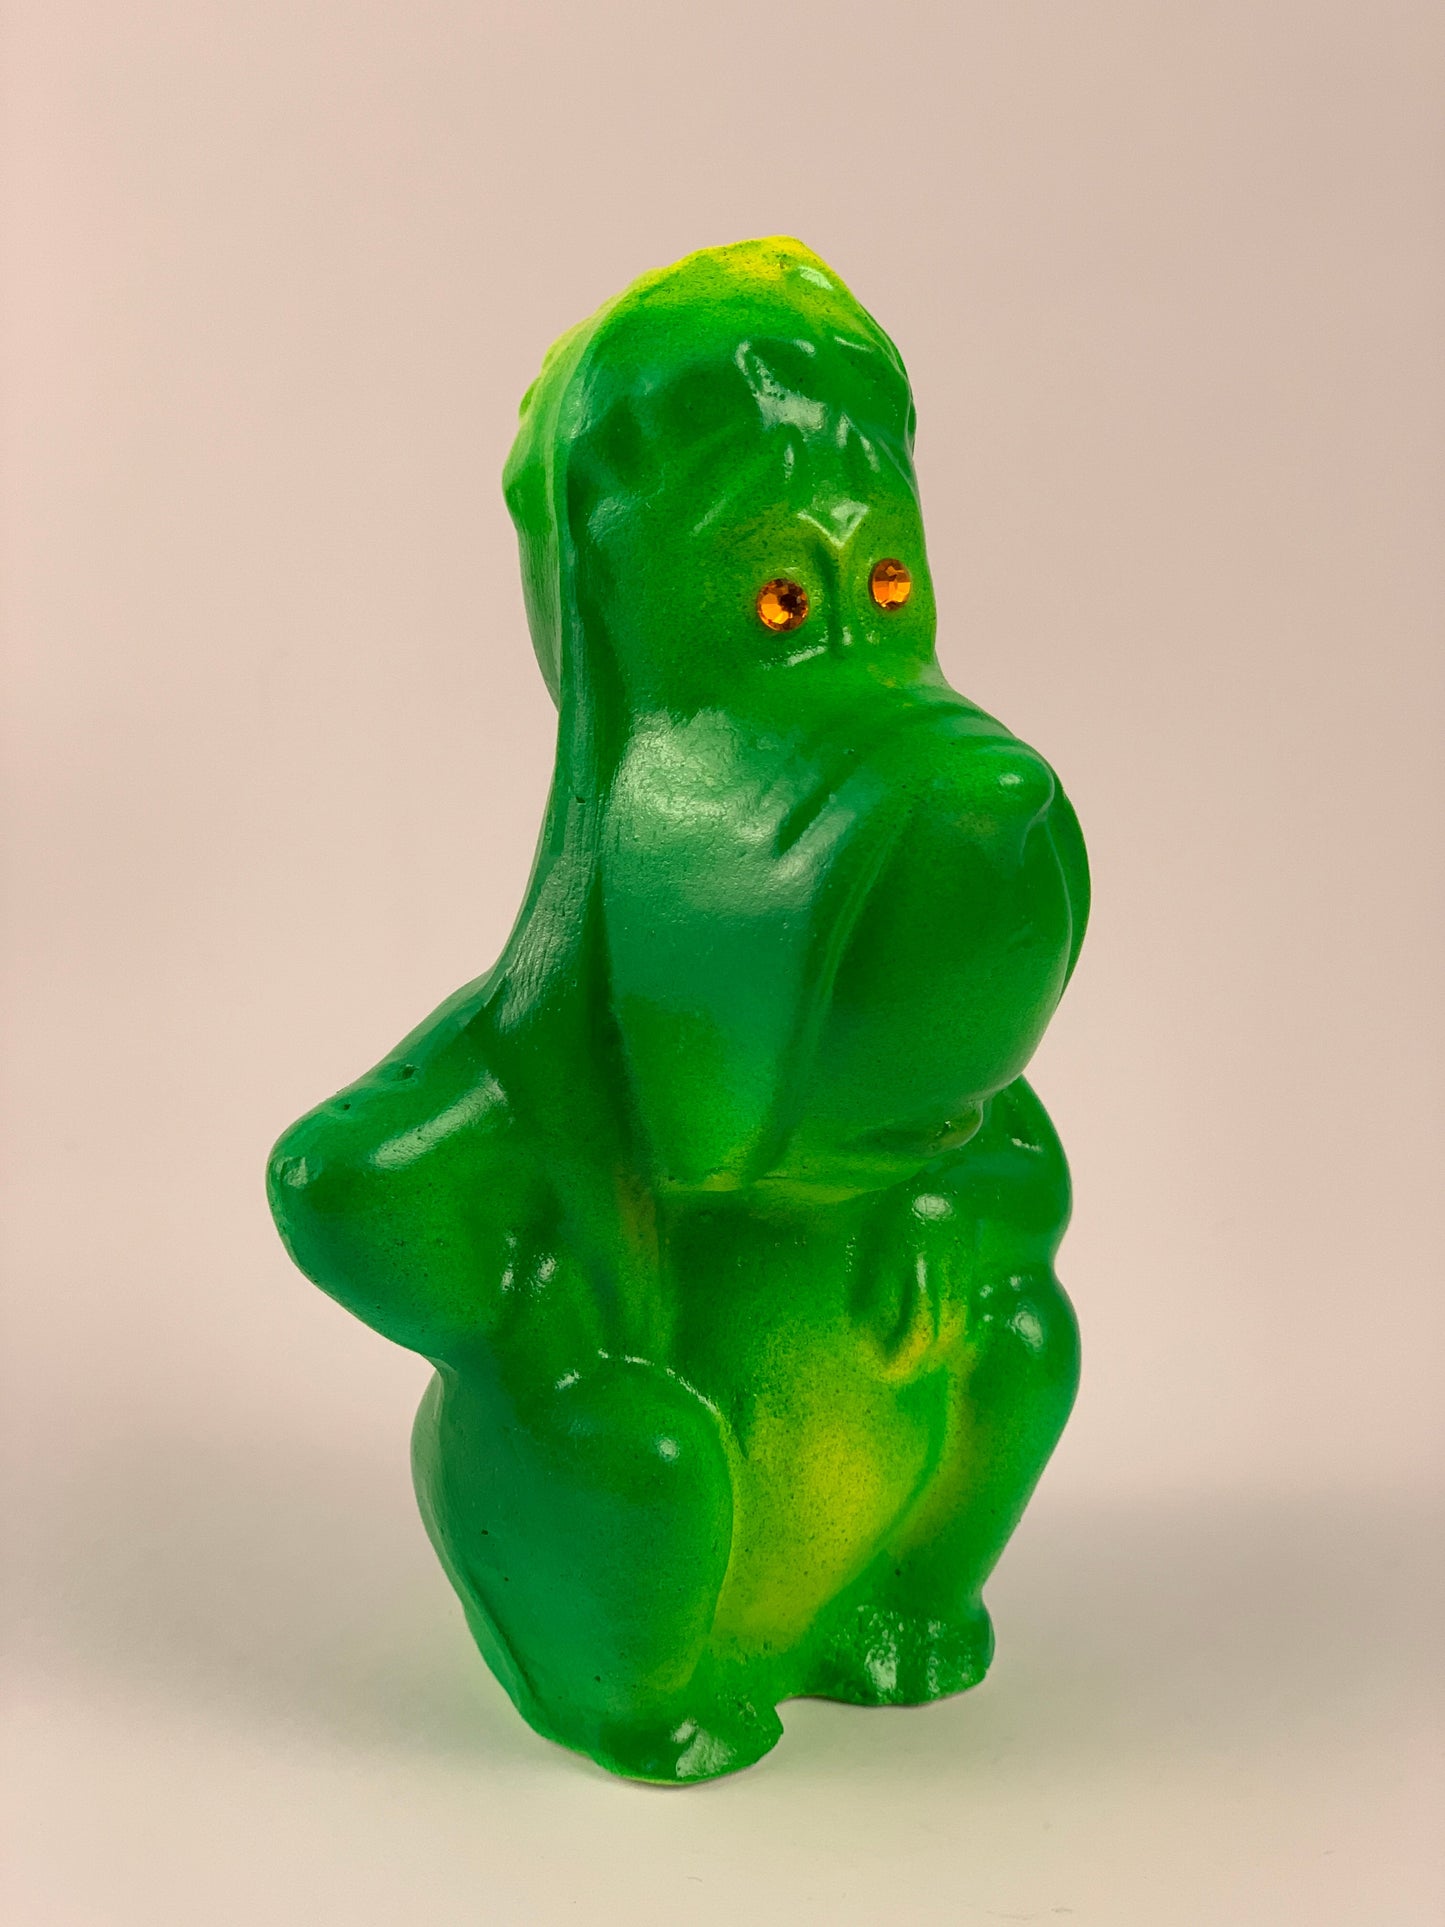 Mister Droopy Chalkware: Green and Yellow